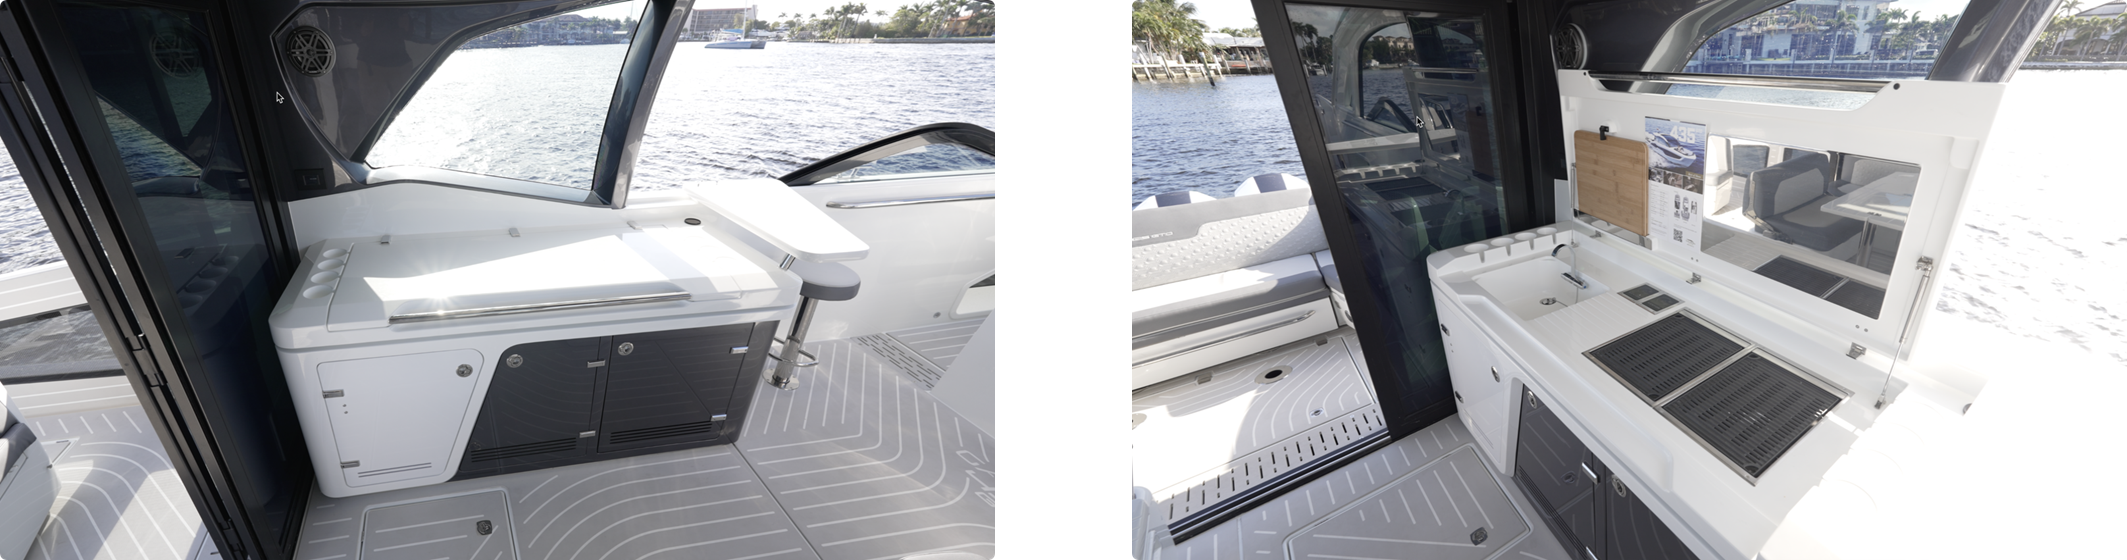 Galeon 435 GTO Chest in the closed and open position